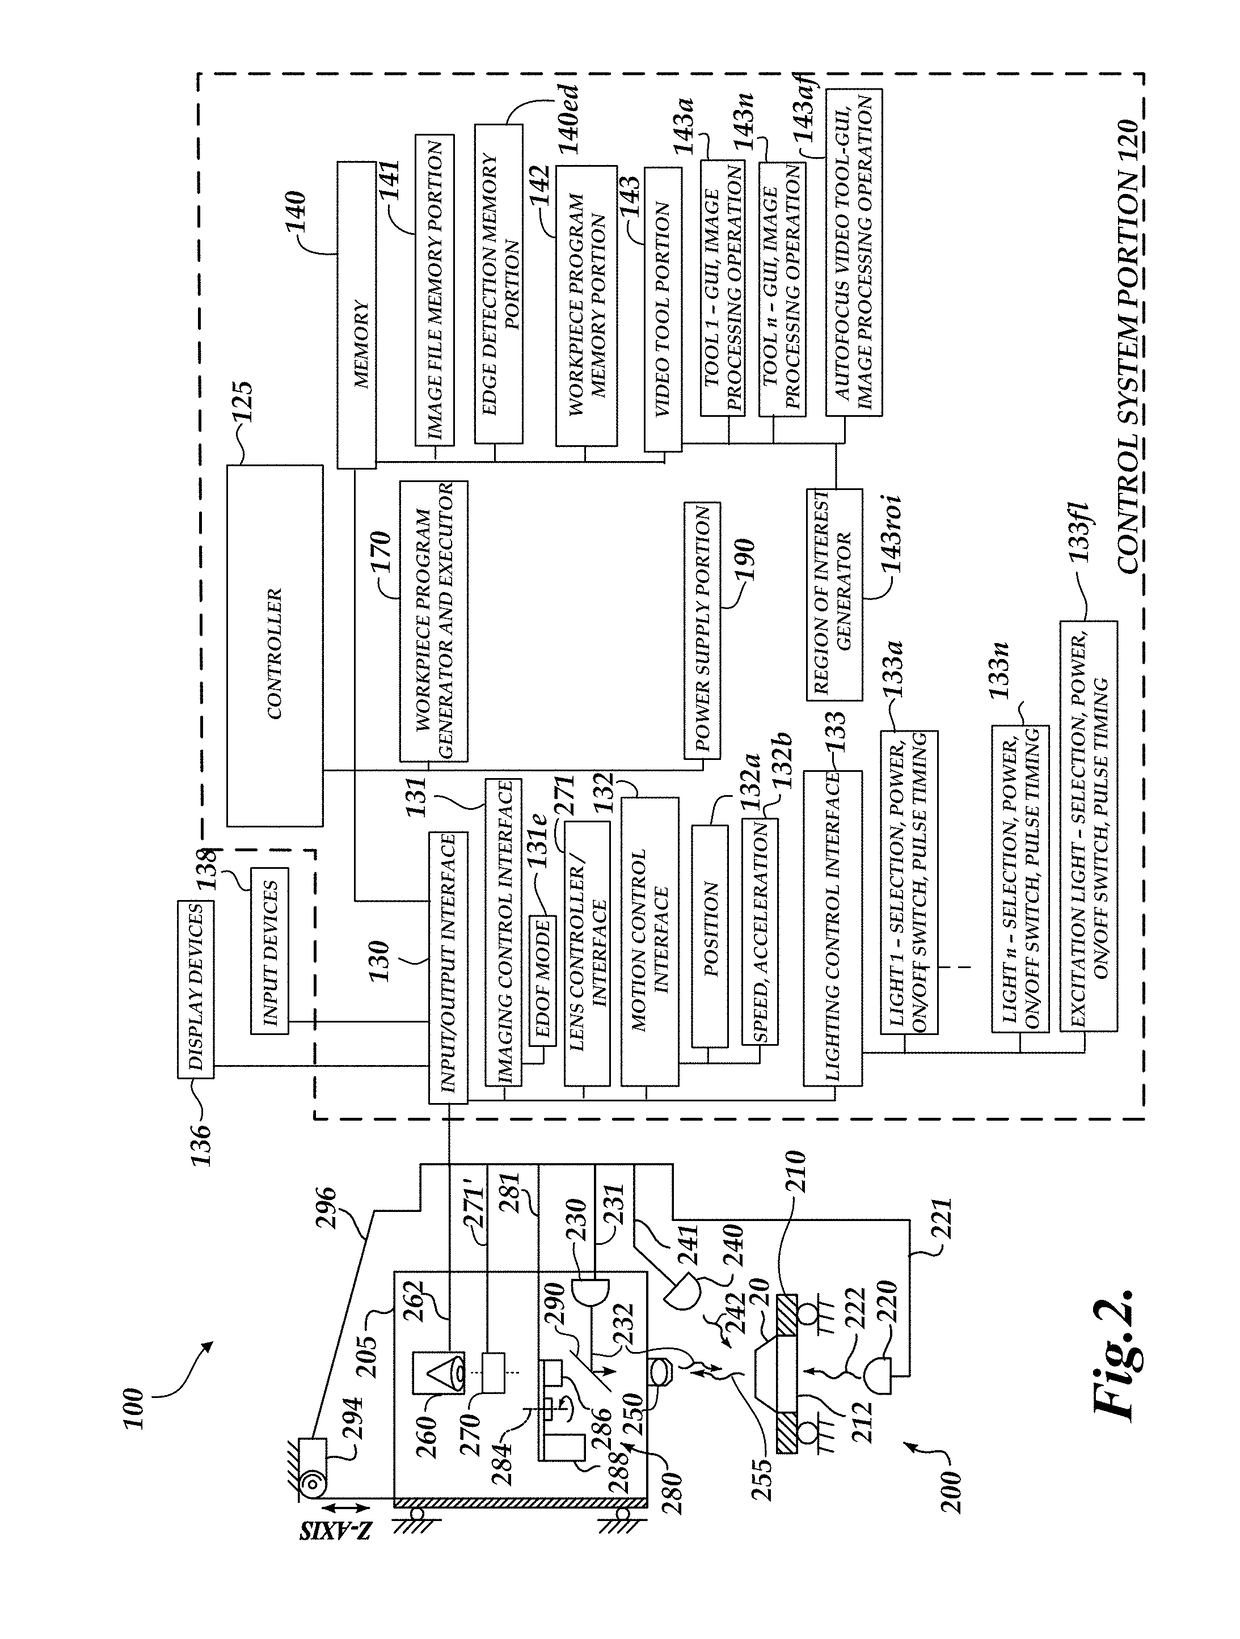 Variable focal length lens system with multi-level extended depth of field image processing